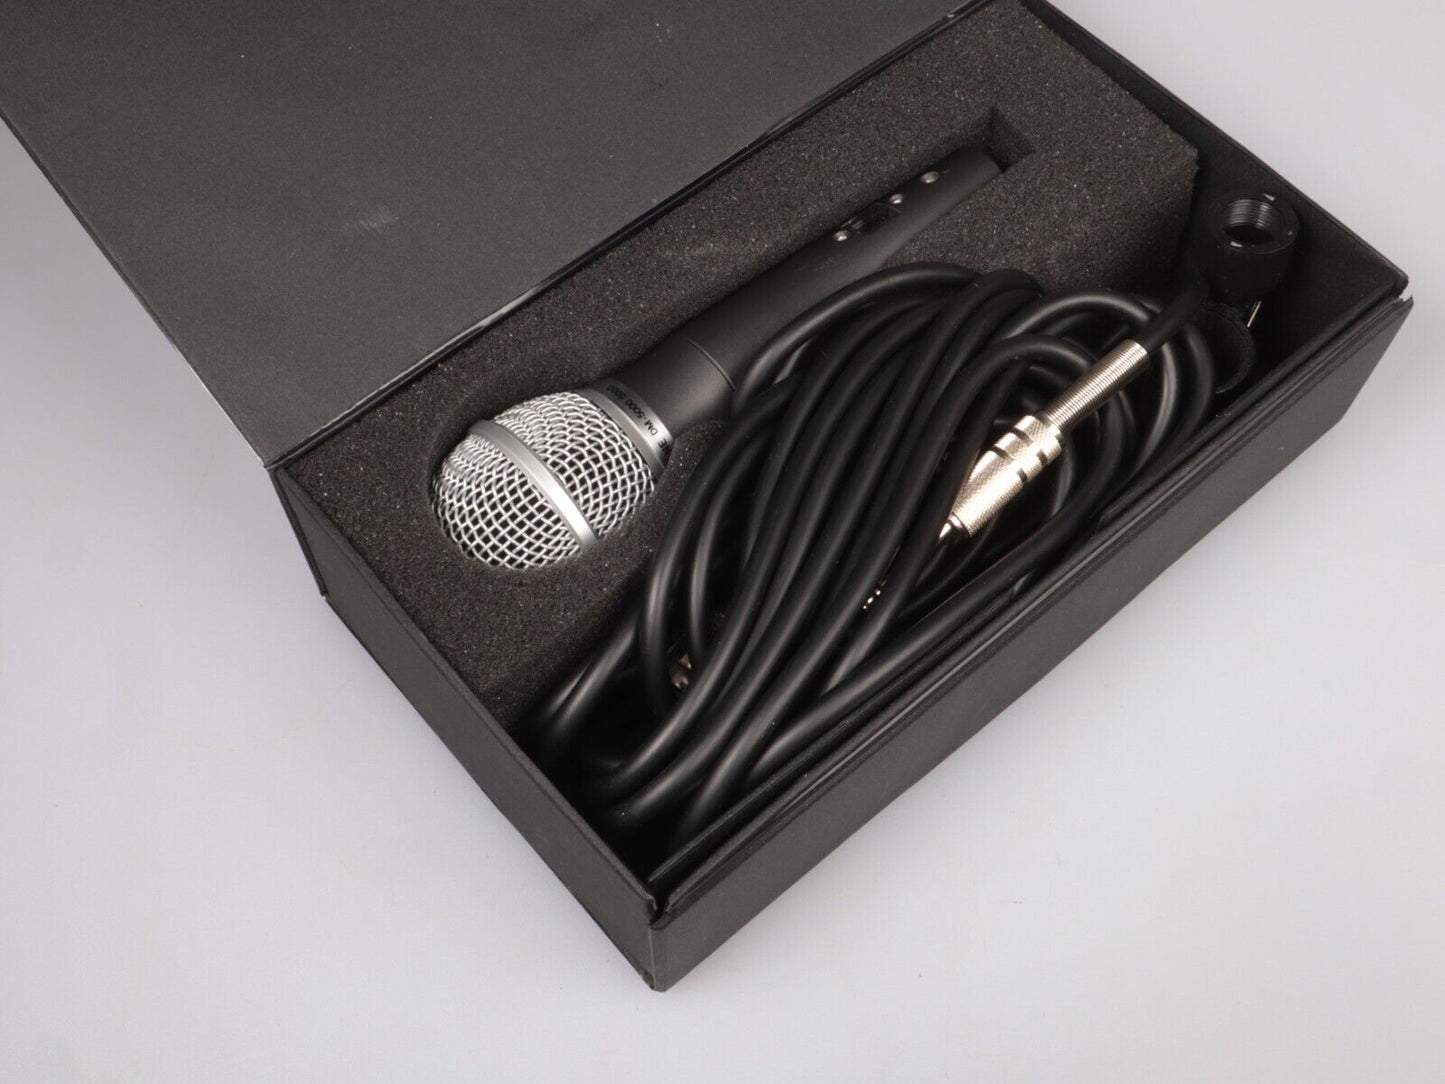 Altai DM-5000 Dynamic Microphone | Professional quality | Boxed